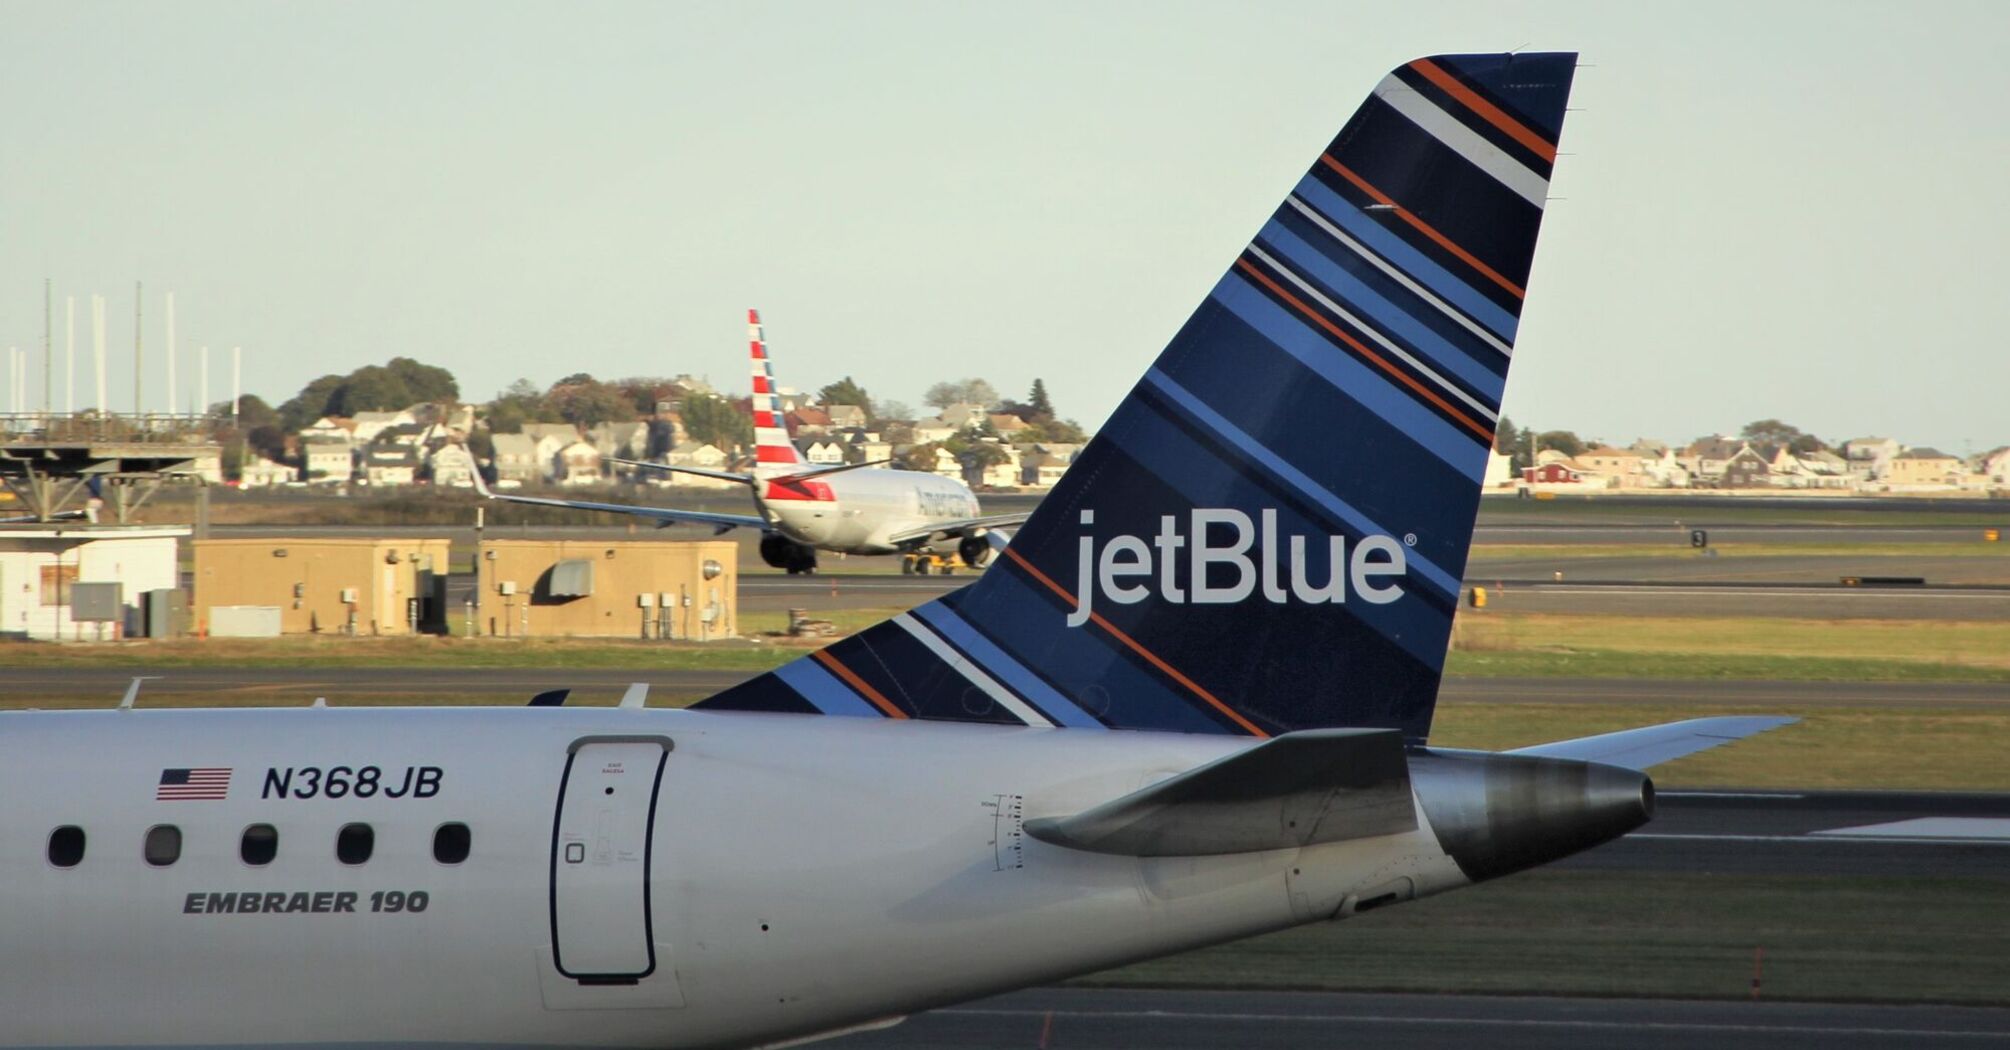 The tail of the JetBlue aircraft at the airport